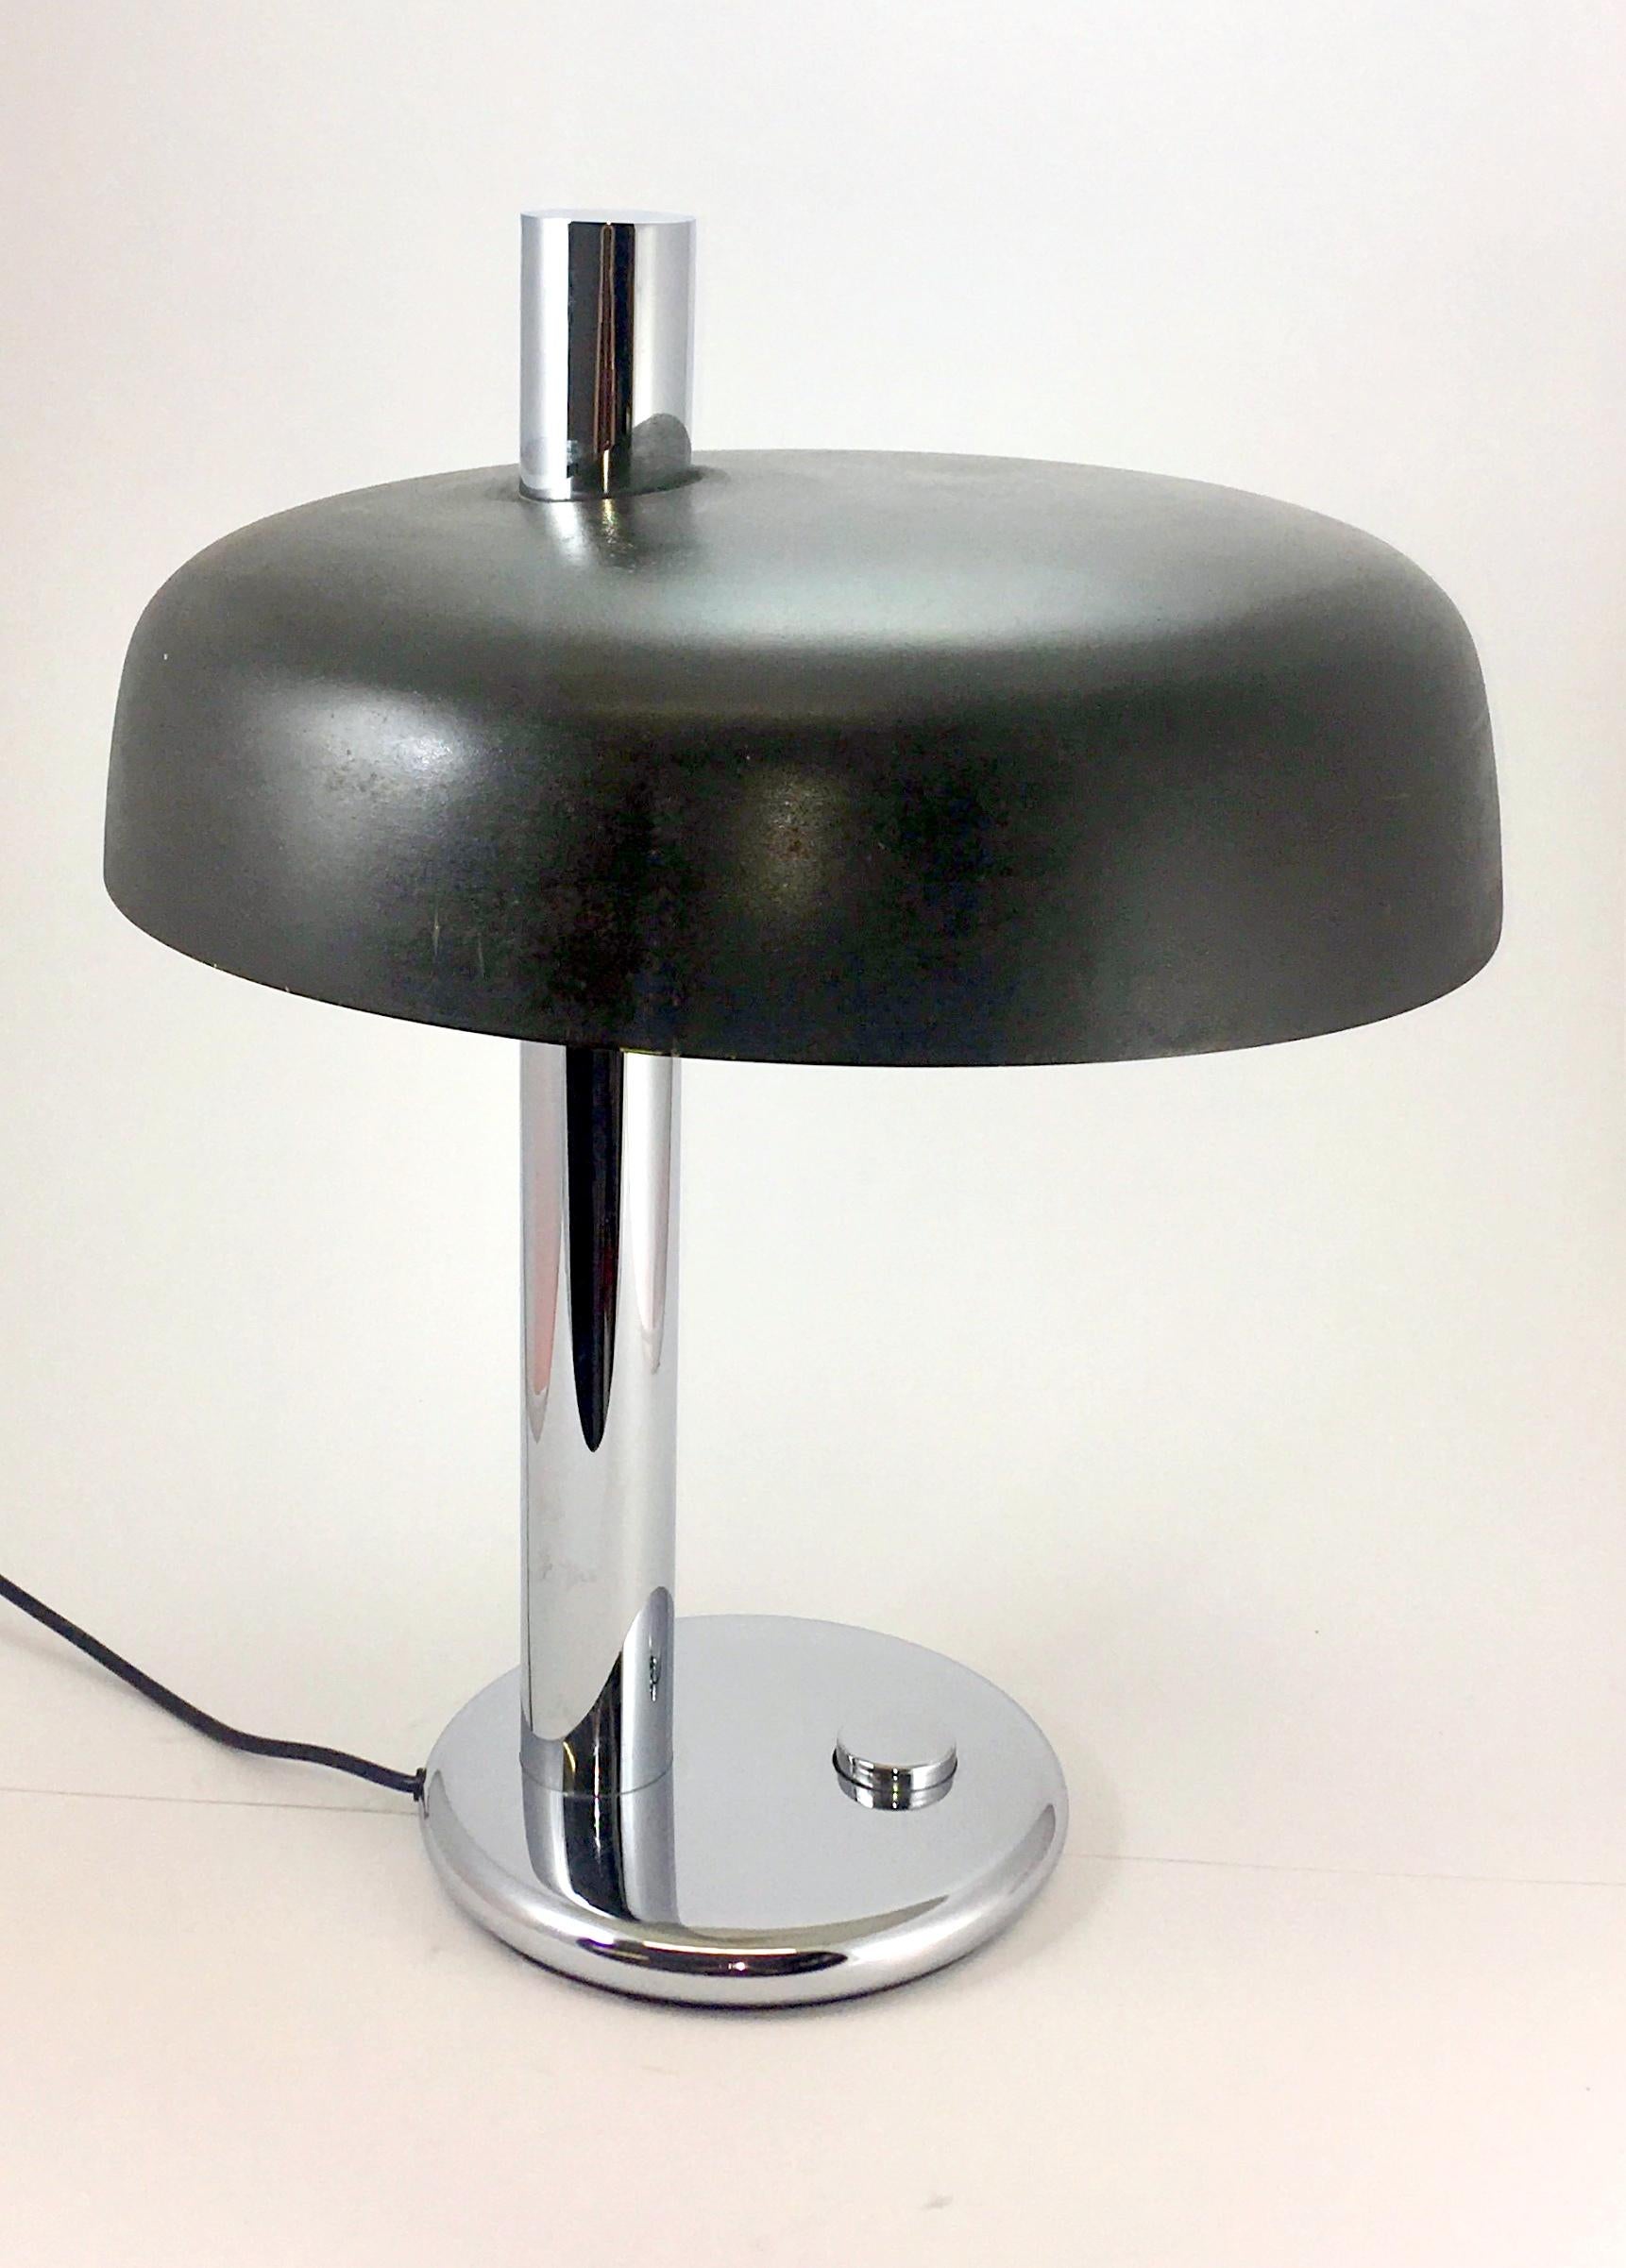 Chrome round base with a big built-in switch. Painted aluminium lampshade, painted white inside. Thick chromed metal rod. Some metal and brass parts. 2 galvanised metal E27 sockets. With very light scratches (last two photo)
Manufacturer: